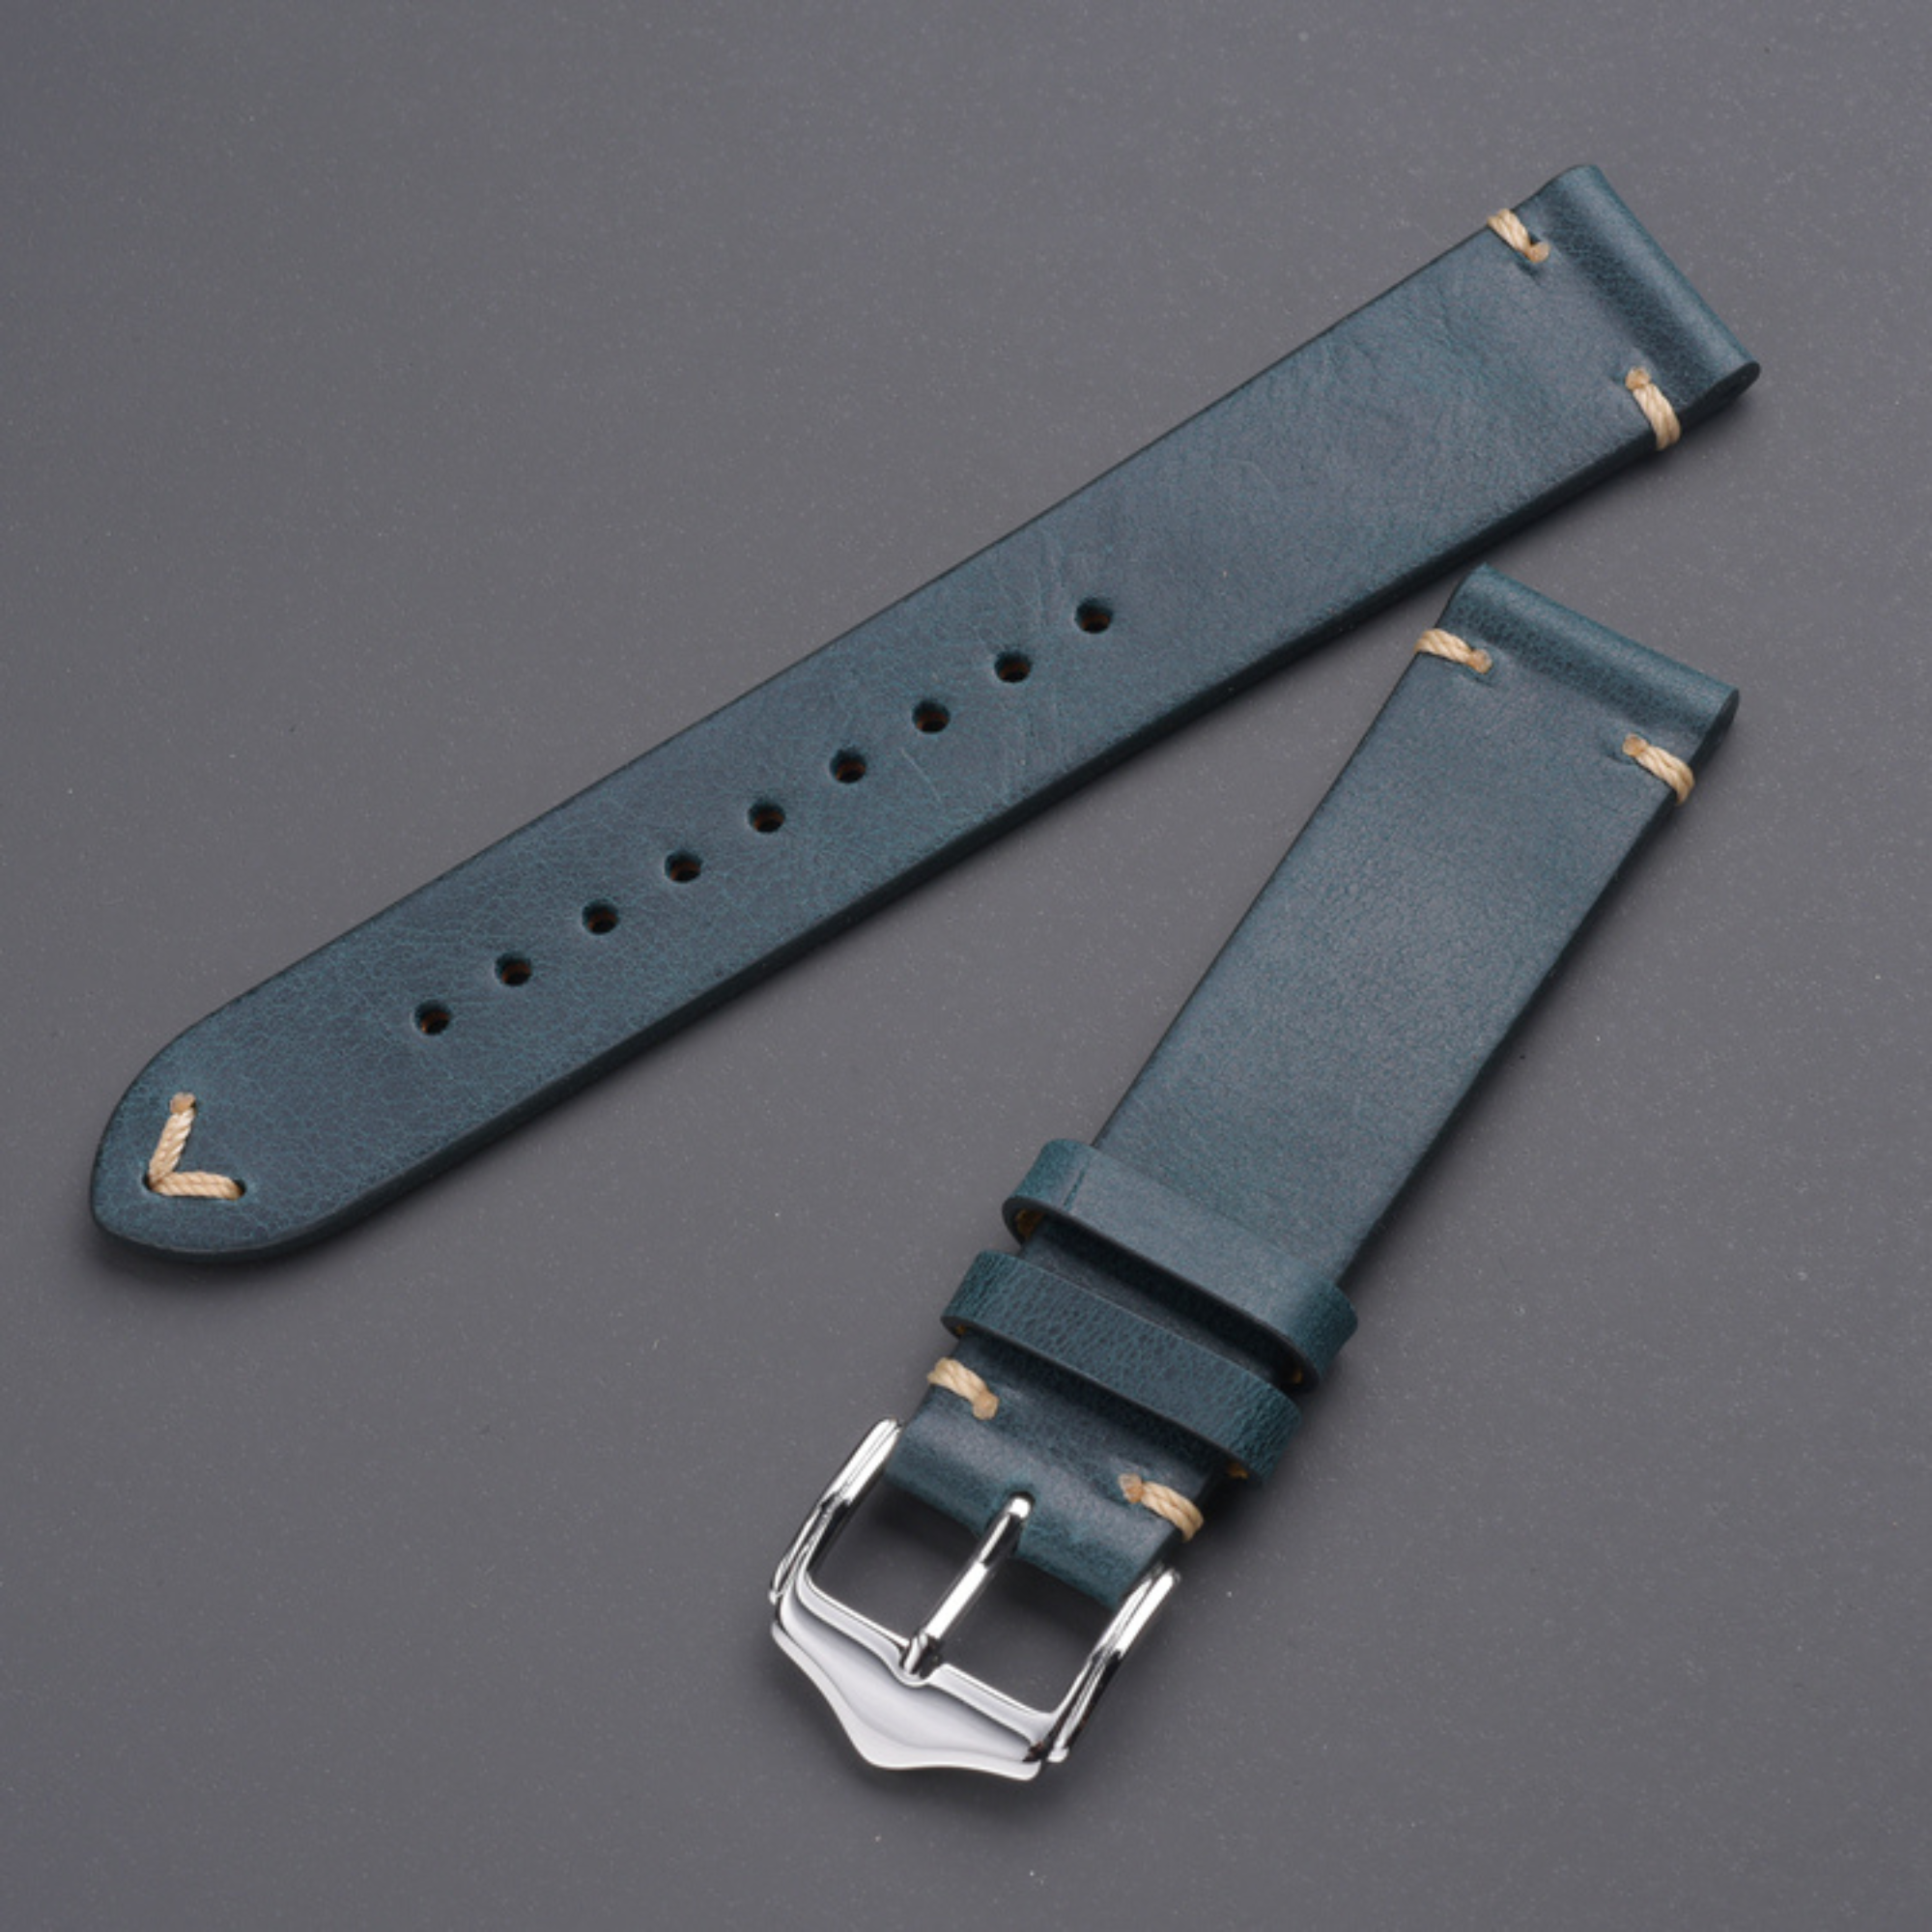 Genuine Leather Watch Strap Watchband Accessories 20mm - Blue watch leather strap band india online dream watches